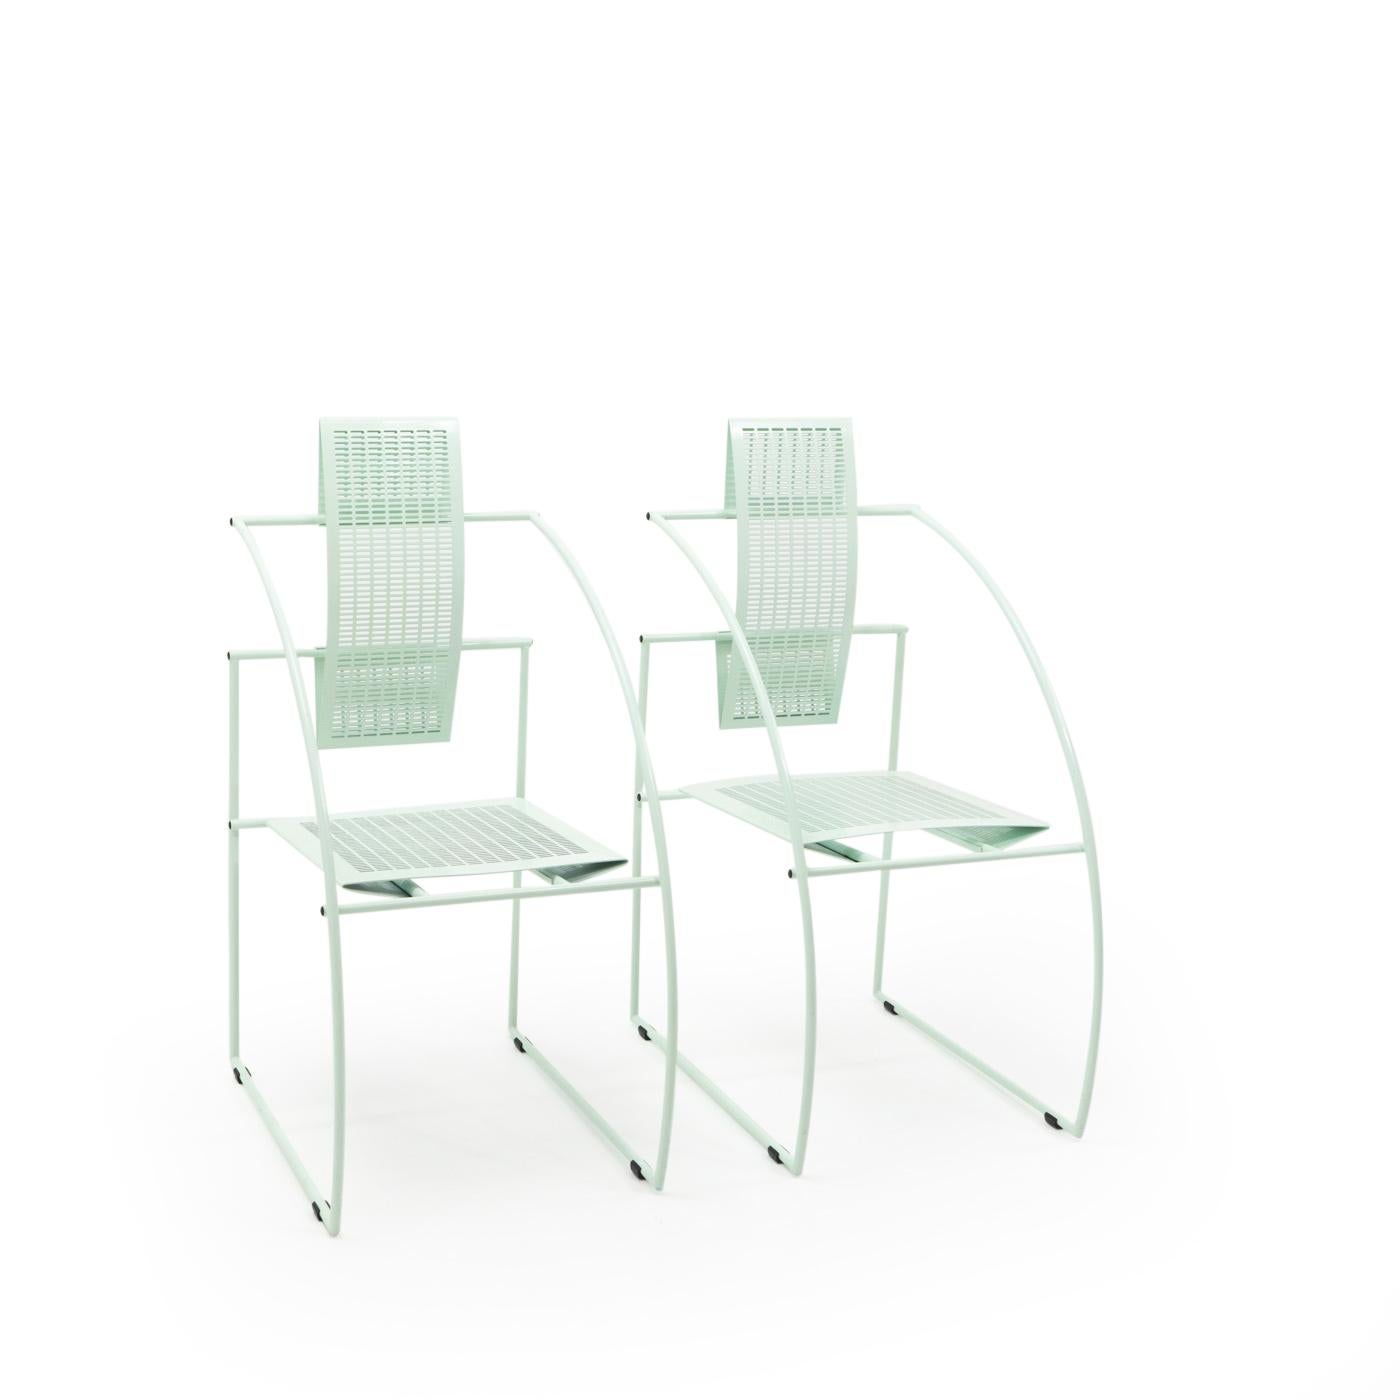 The Quinta Chair is an iconic piece of design, with use of perforated sheet metal and tubing,which are typical for Botta’s furniture and lamps. The lines of these chairs are sharp, rational and symmetric, and seen as his answer to the Memphis